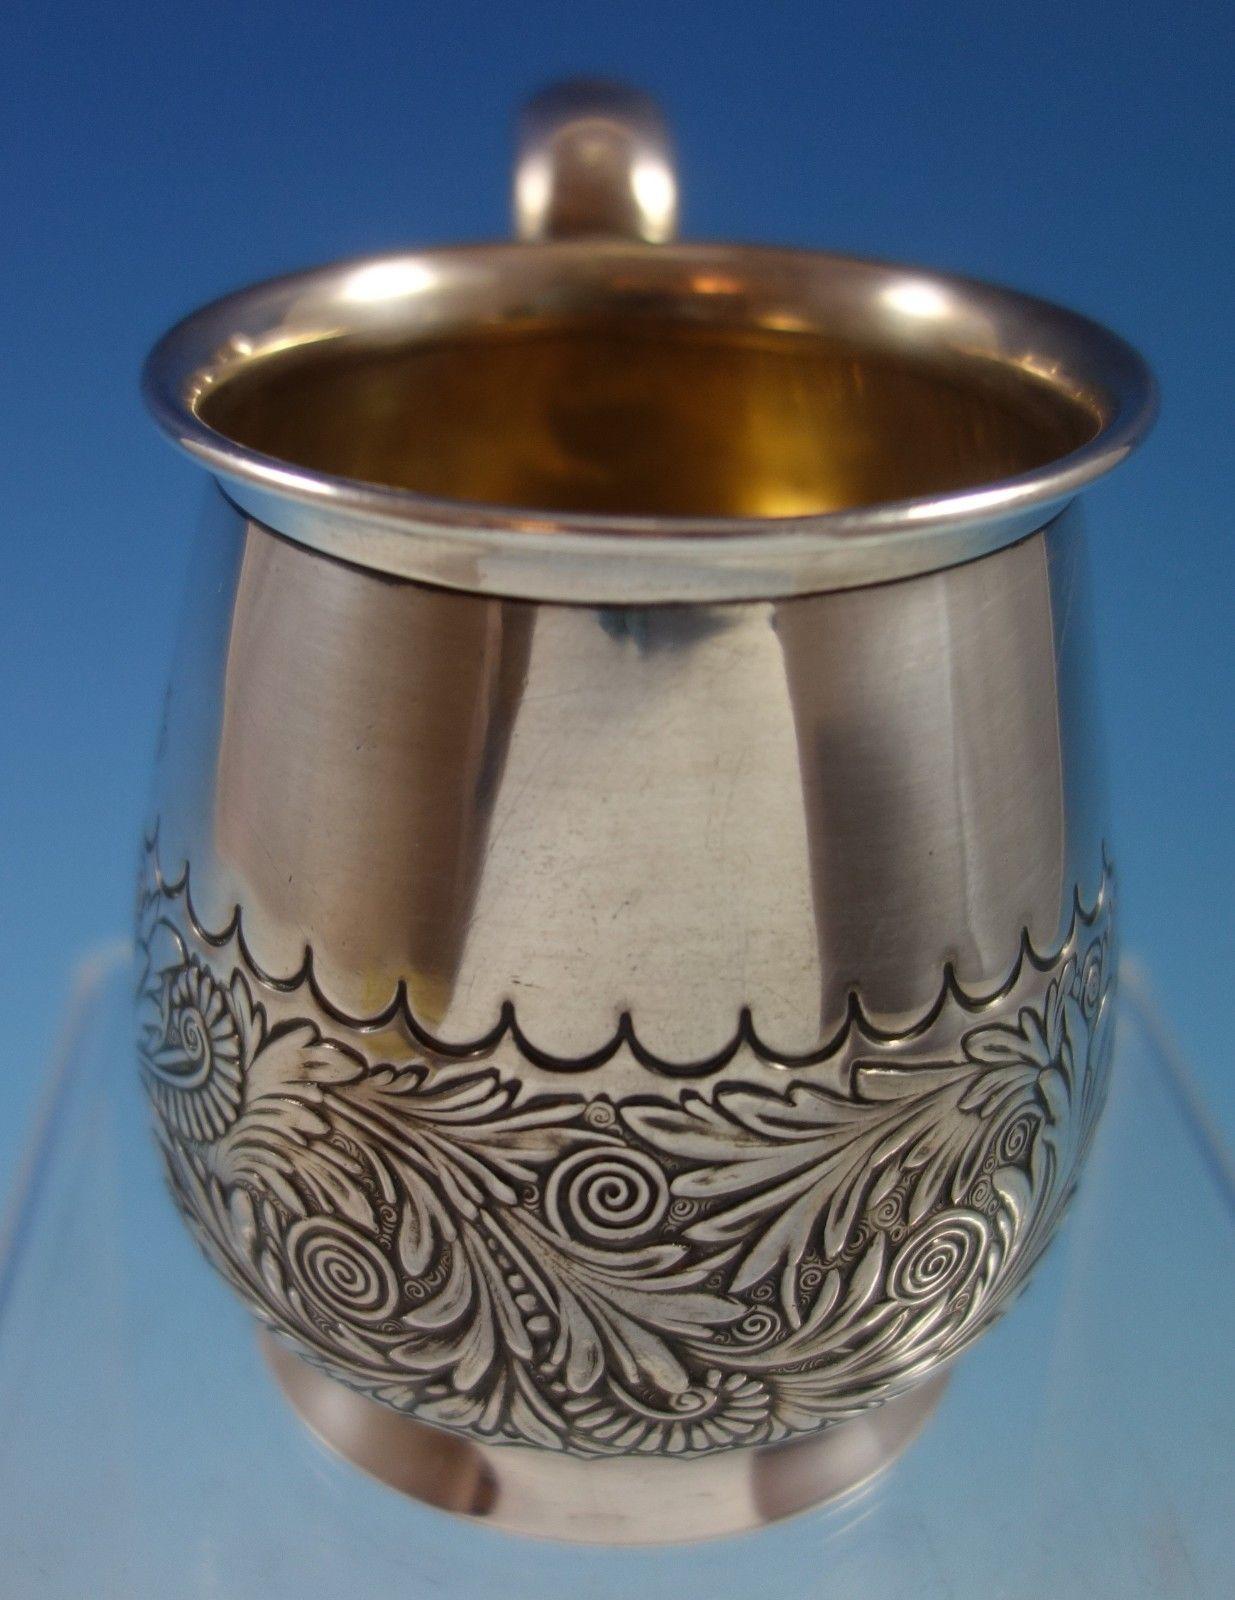 Saint Cloud by Gorham sterling silver baby cup with gold washed interior. The piece is marked with #3935. It has a monogram that reads Nancy, and has an inscription on the bottom that says, To Mary Nelson Williams from Mary Nelson Williams Putnam